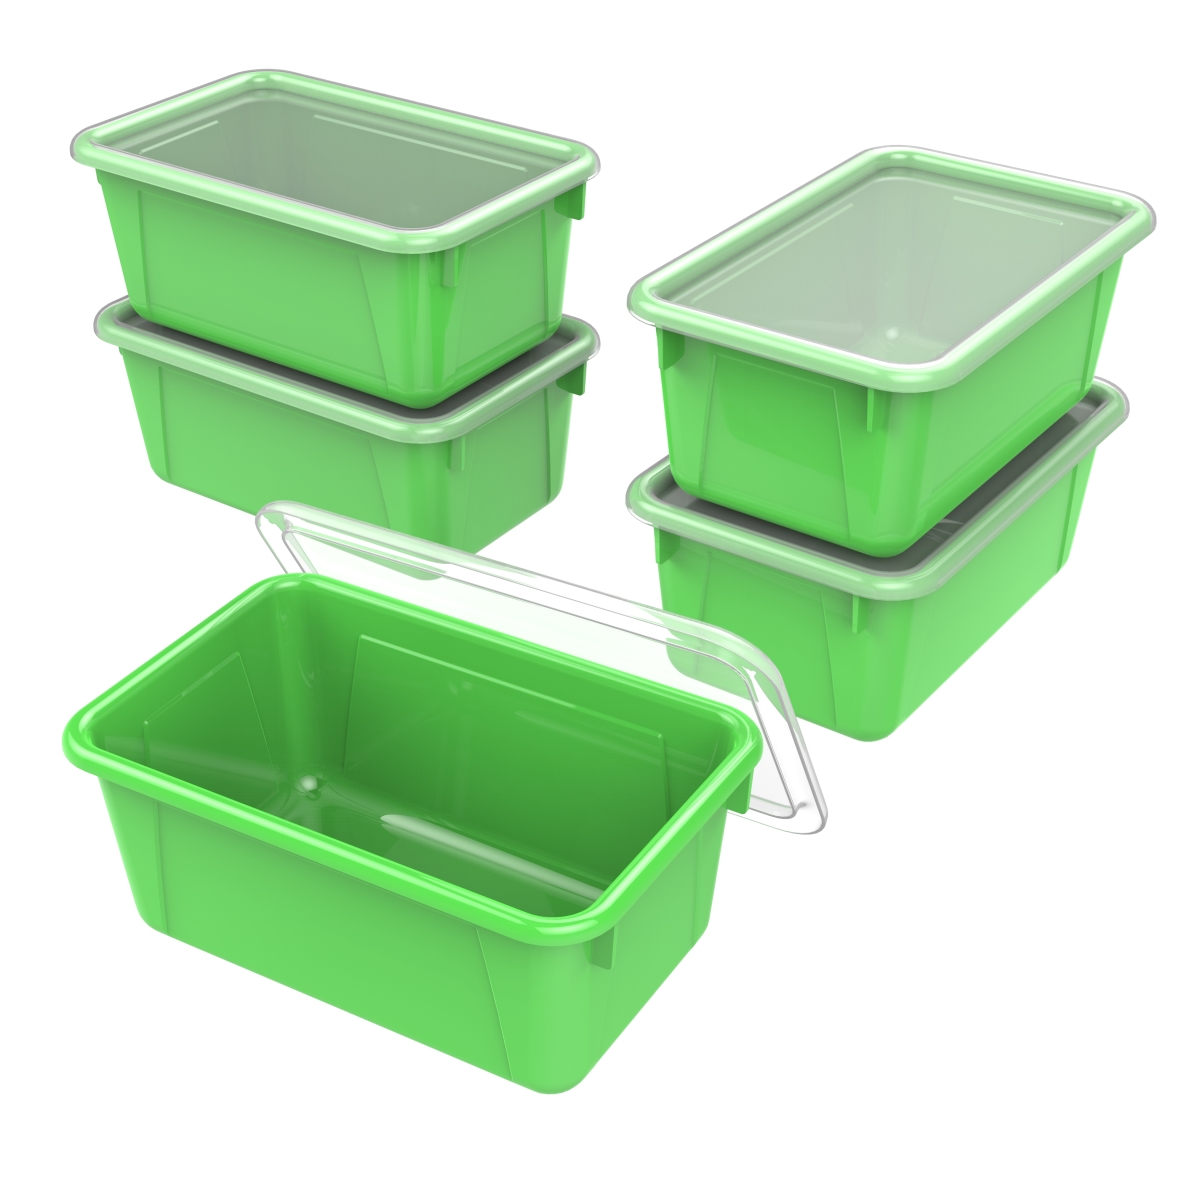 Classroom Small Cubby Bin With Cover, Green - Pack Of 5